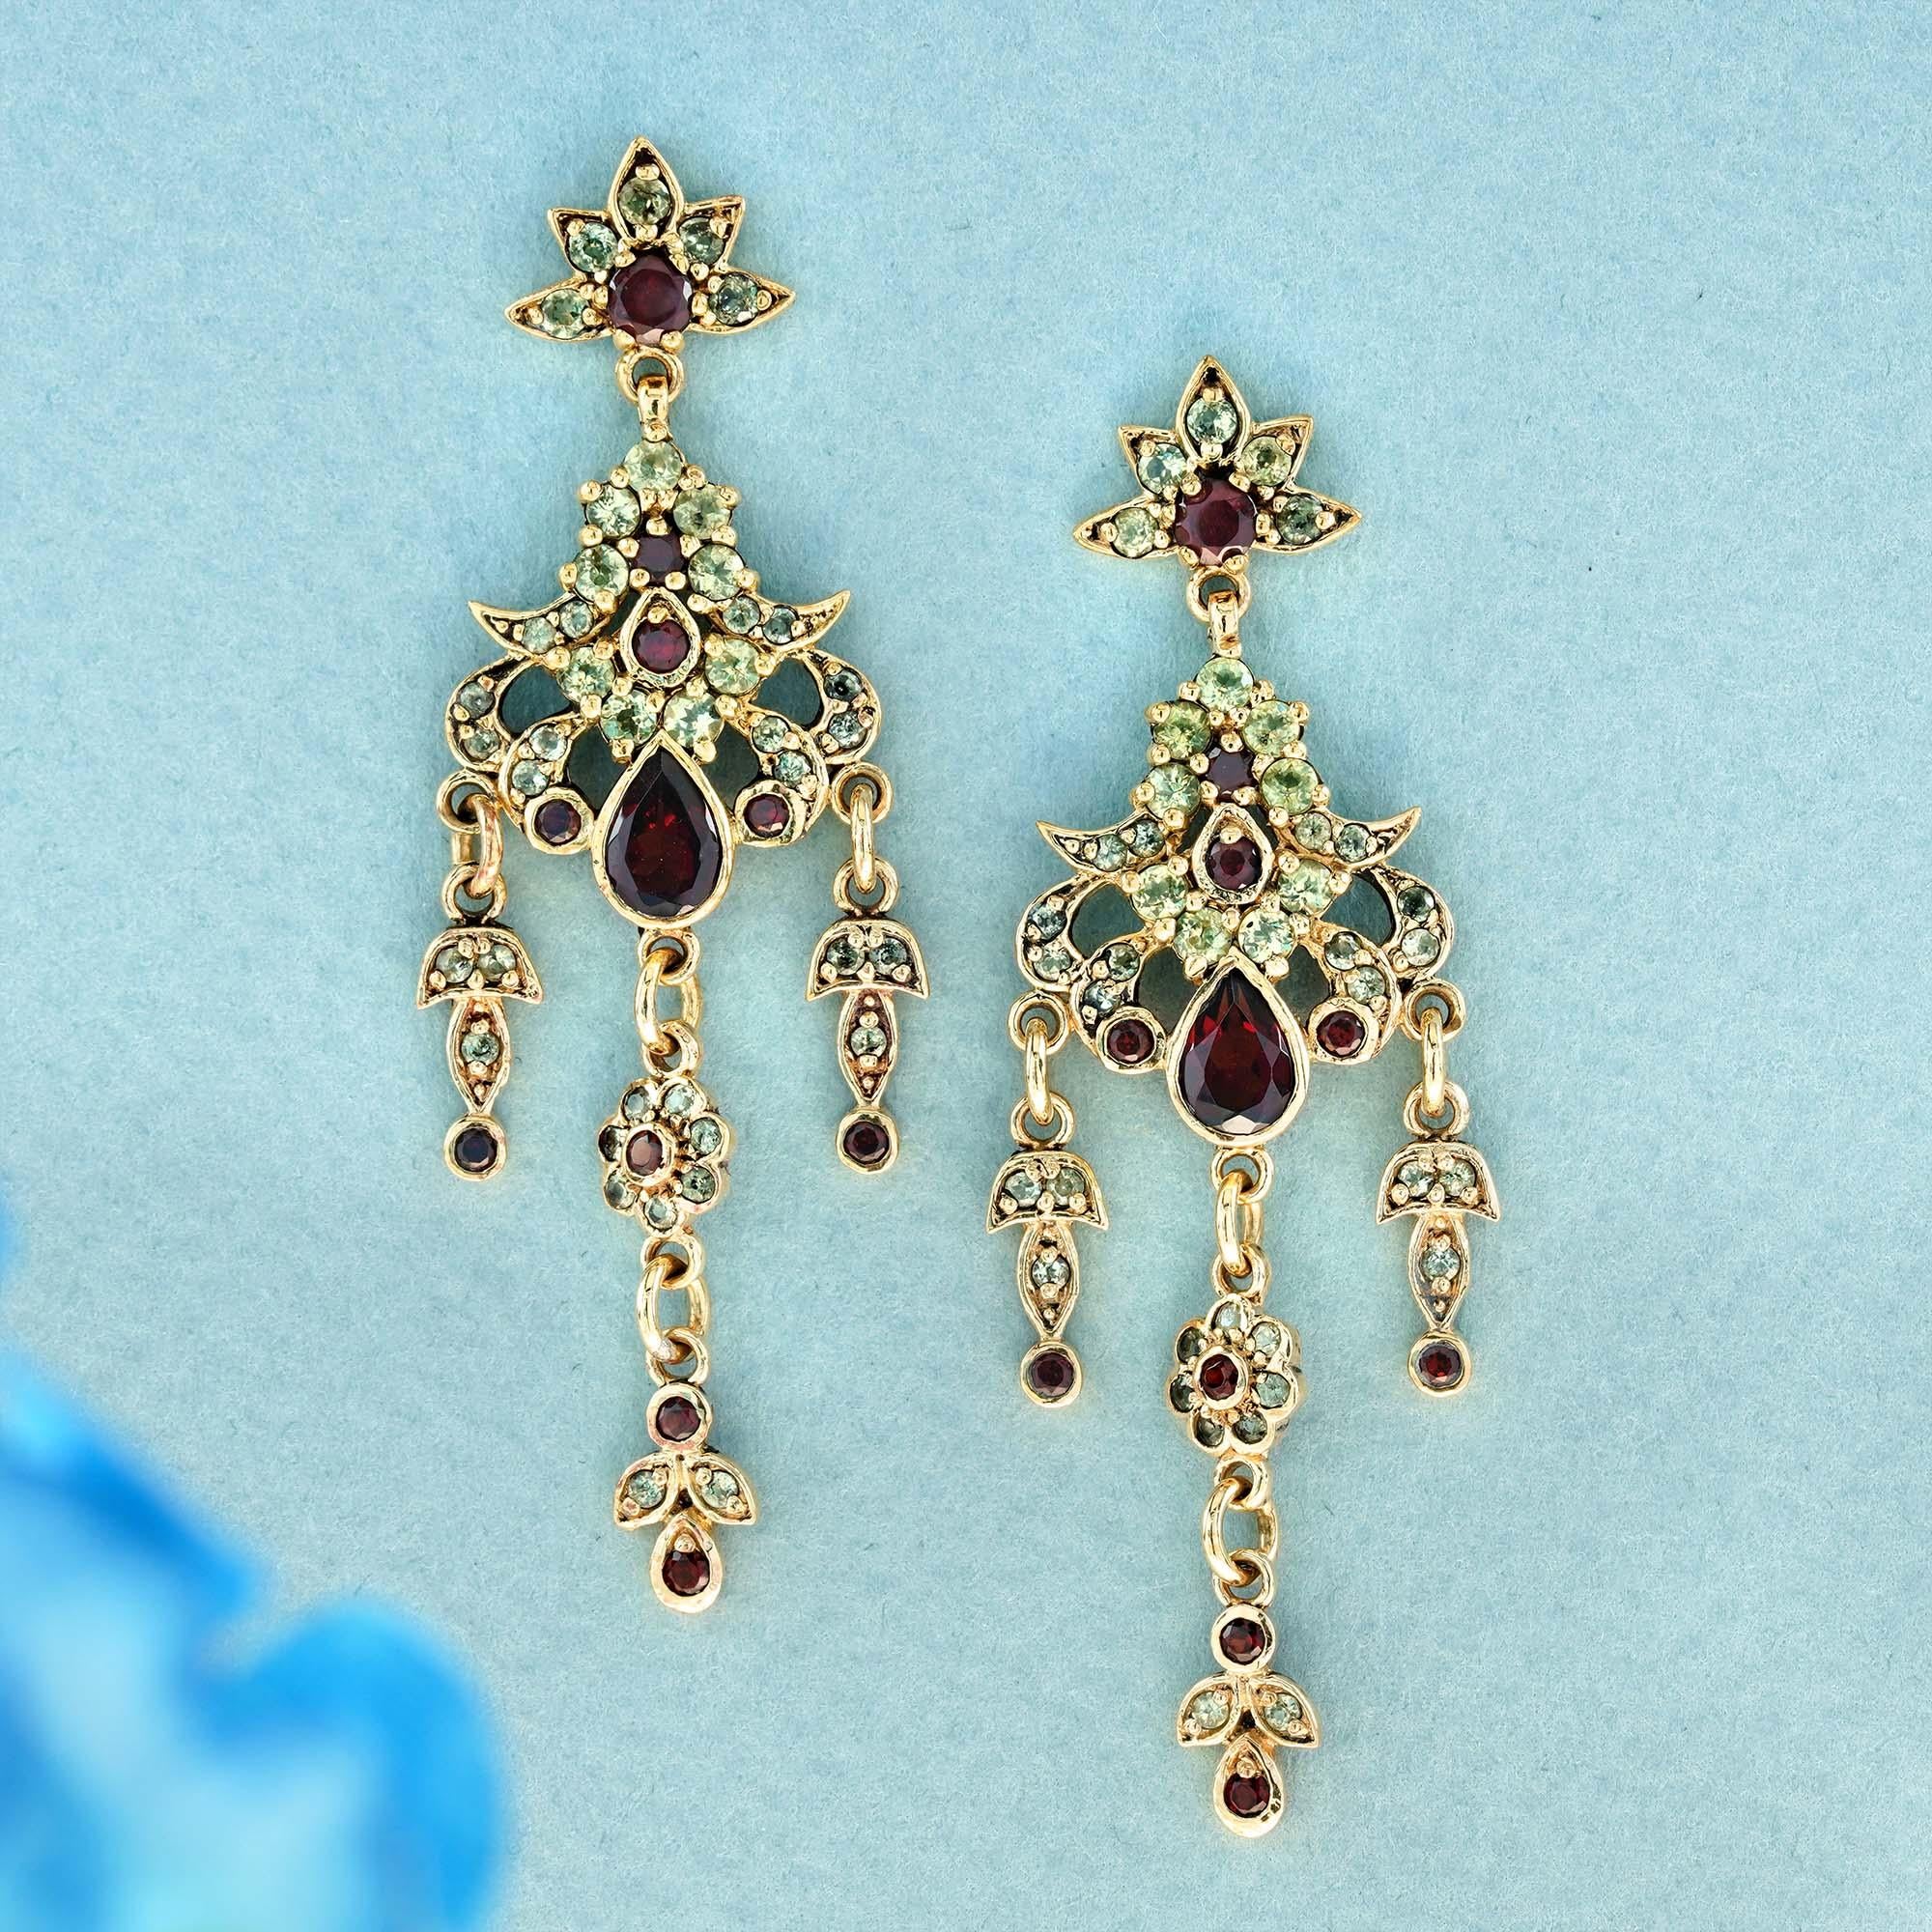 These dazzling solid yellow gold chandelier earrings are  flawlessly designed in a vintage style, showcase a cascading design of of multiple tiers of natural round and pear red garnets,  like a fine wine, and add a touch of freshness and contrast